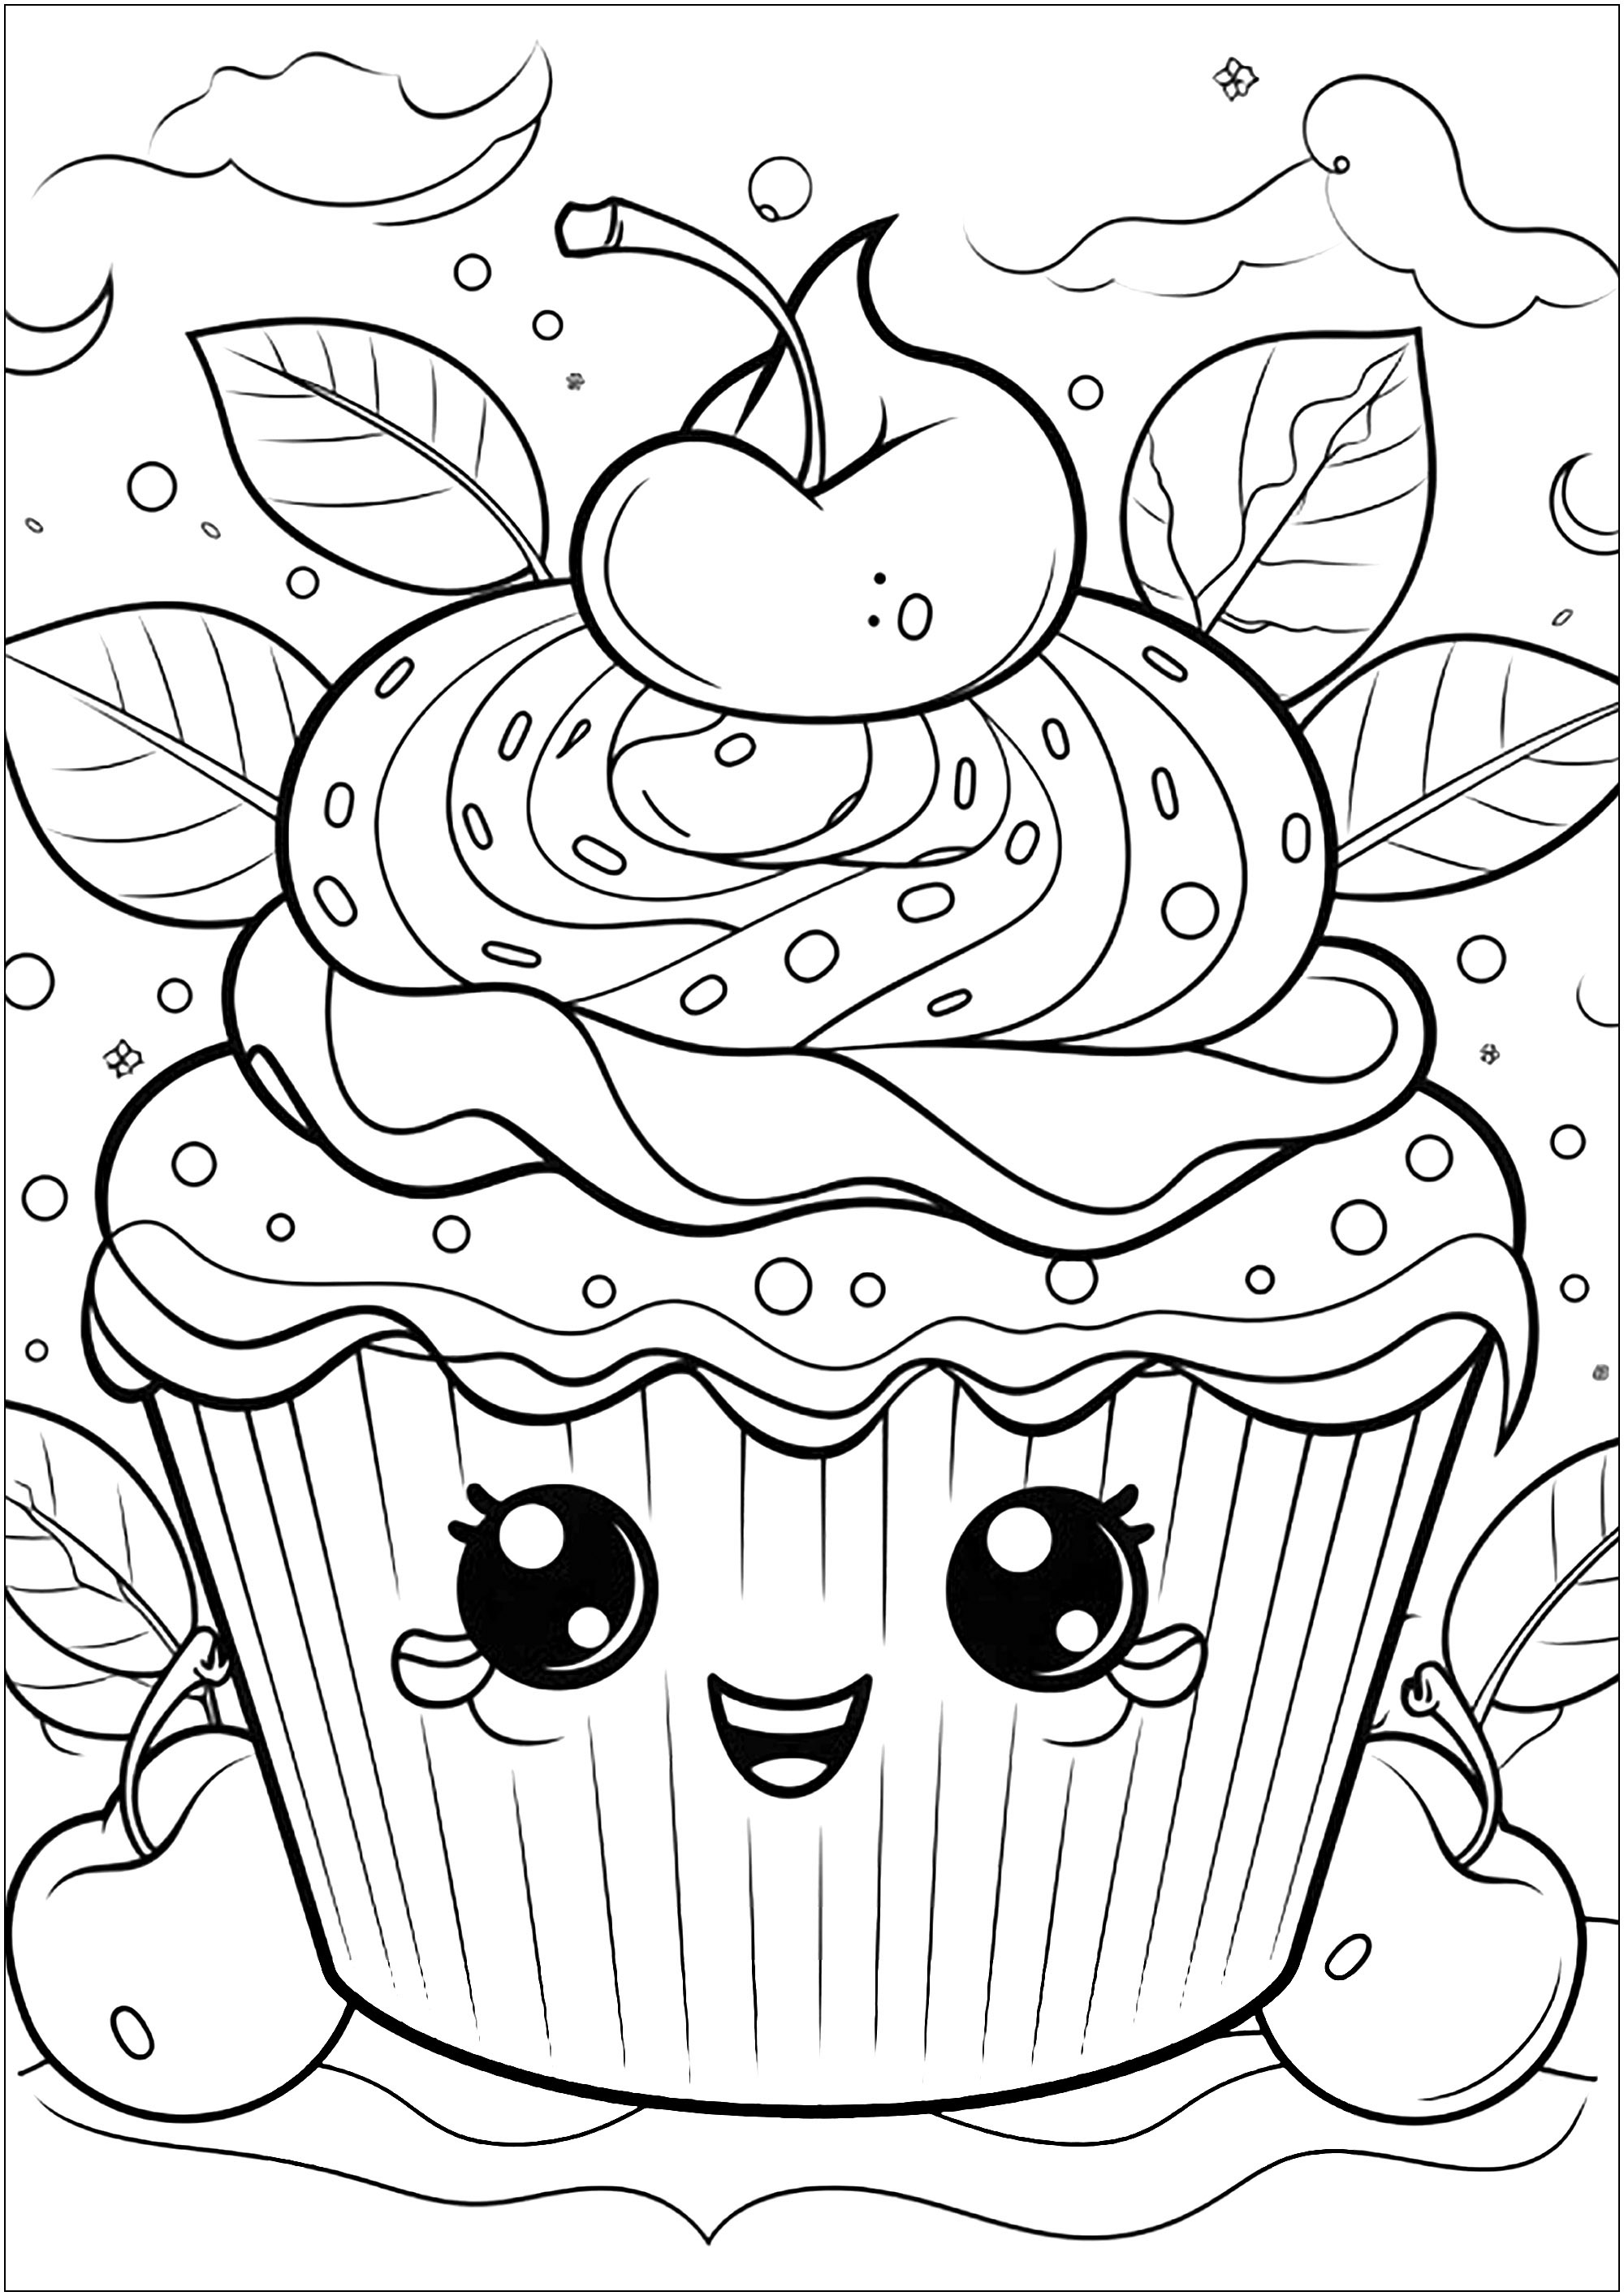 Cherry cream cupcake. Lots of detail in this cupcake coloring page